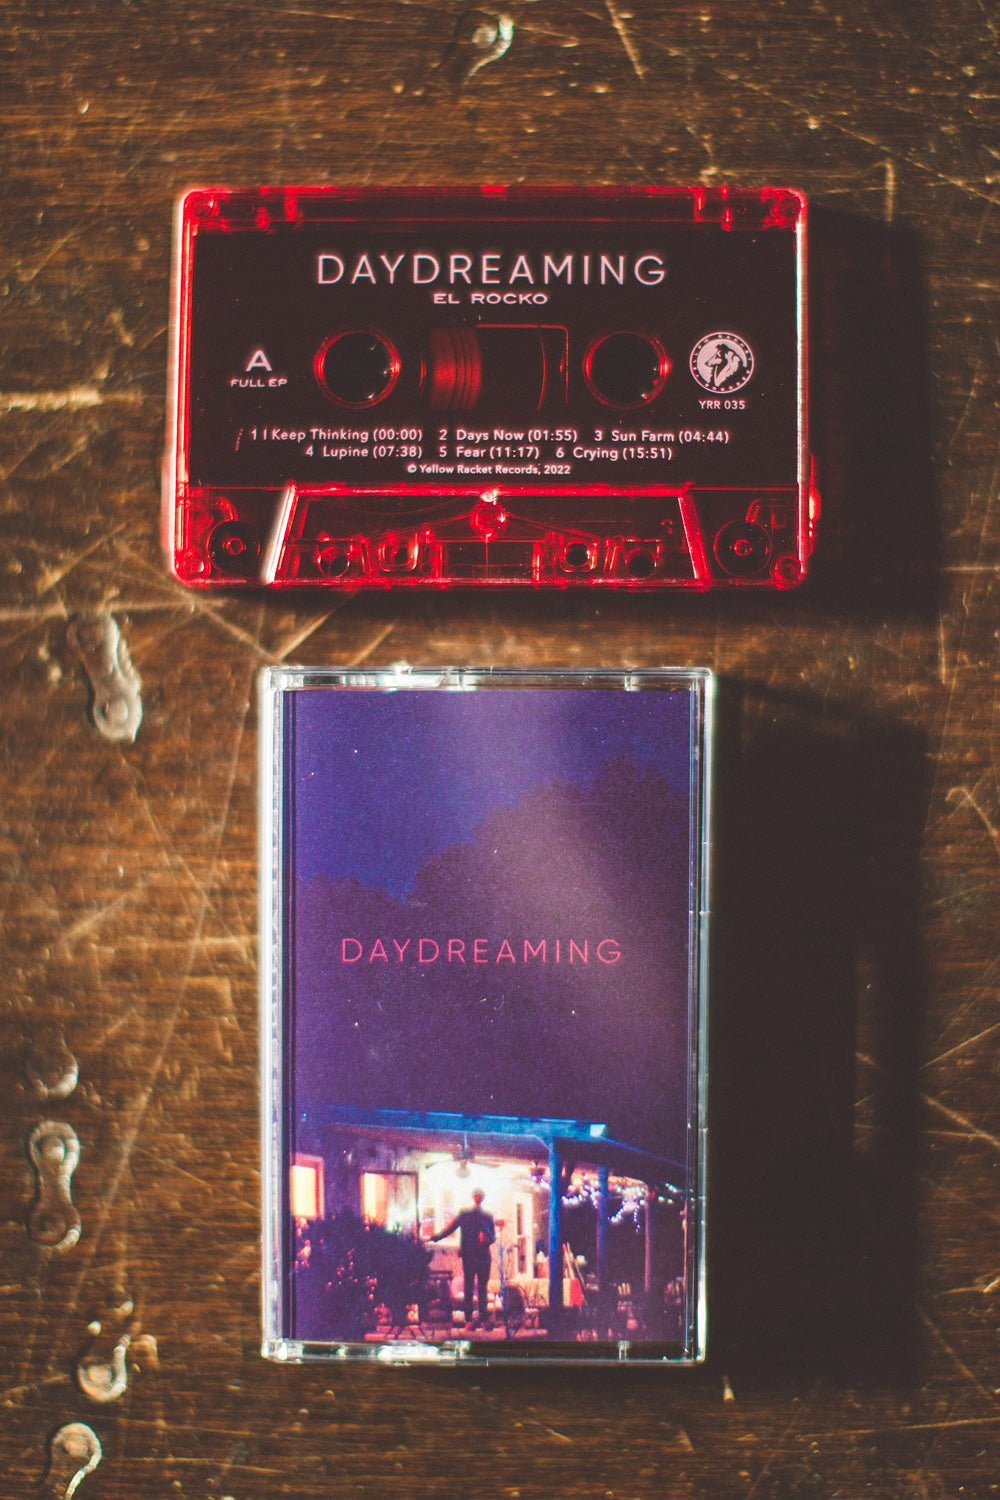 El Rocko - Daydreaming (EP) (Translucent Red Cassette) - N - El Rocko - Daydreaming (EP, Translucent Red Cassette) - Cassettes - Yellow Racket Records